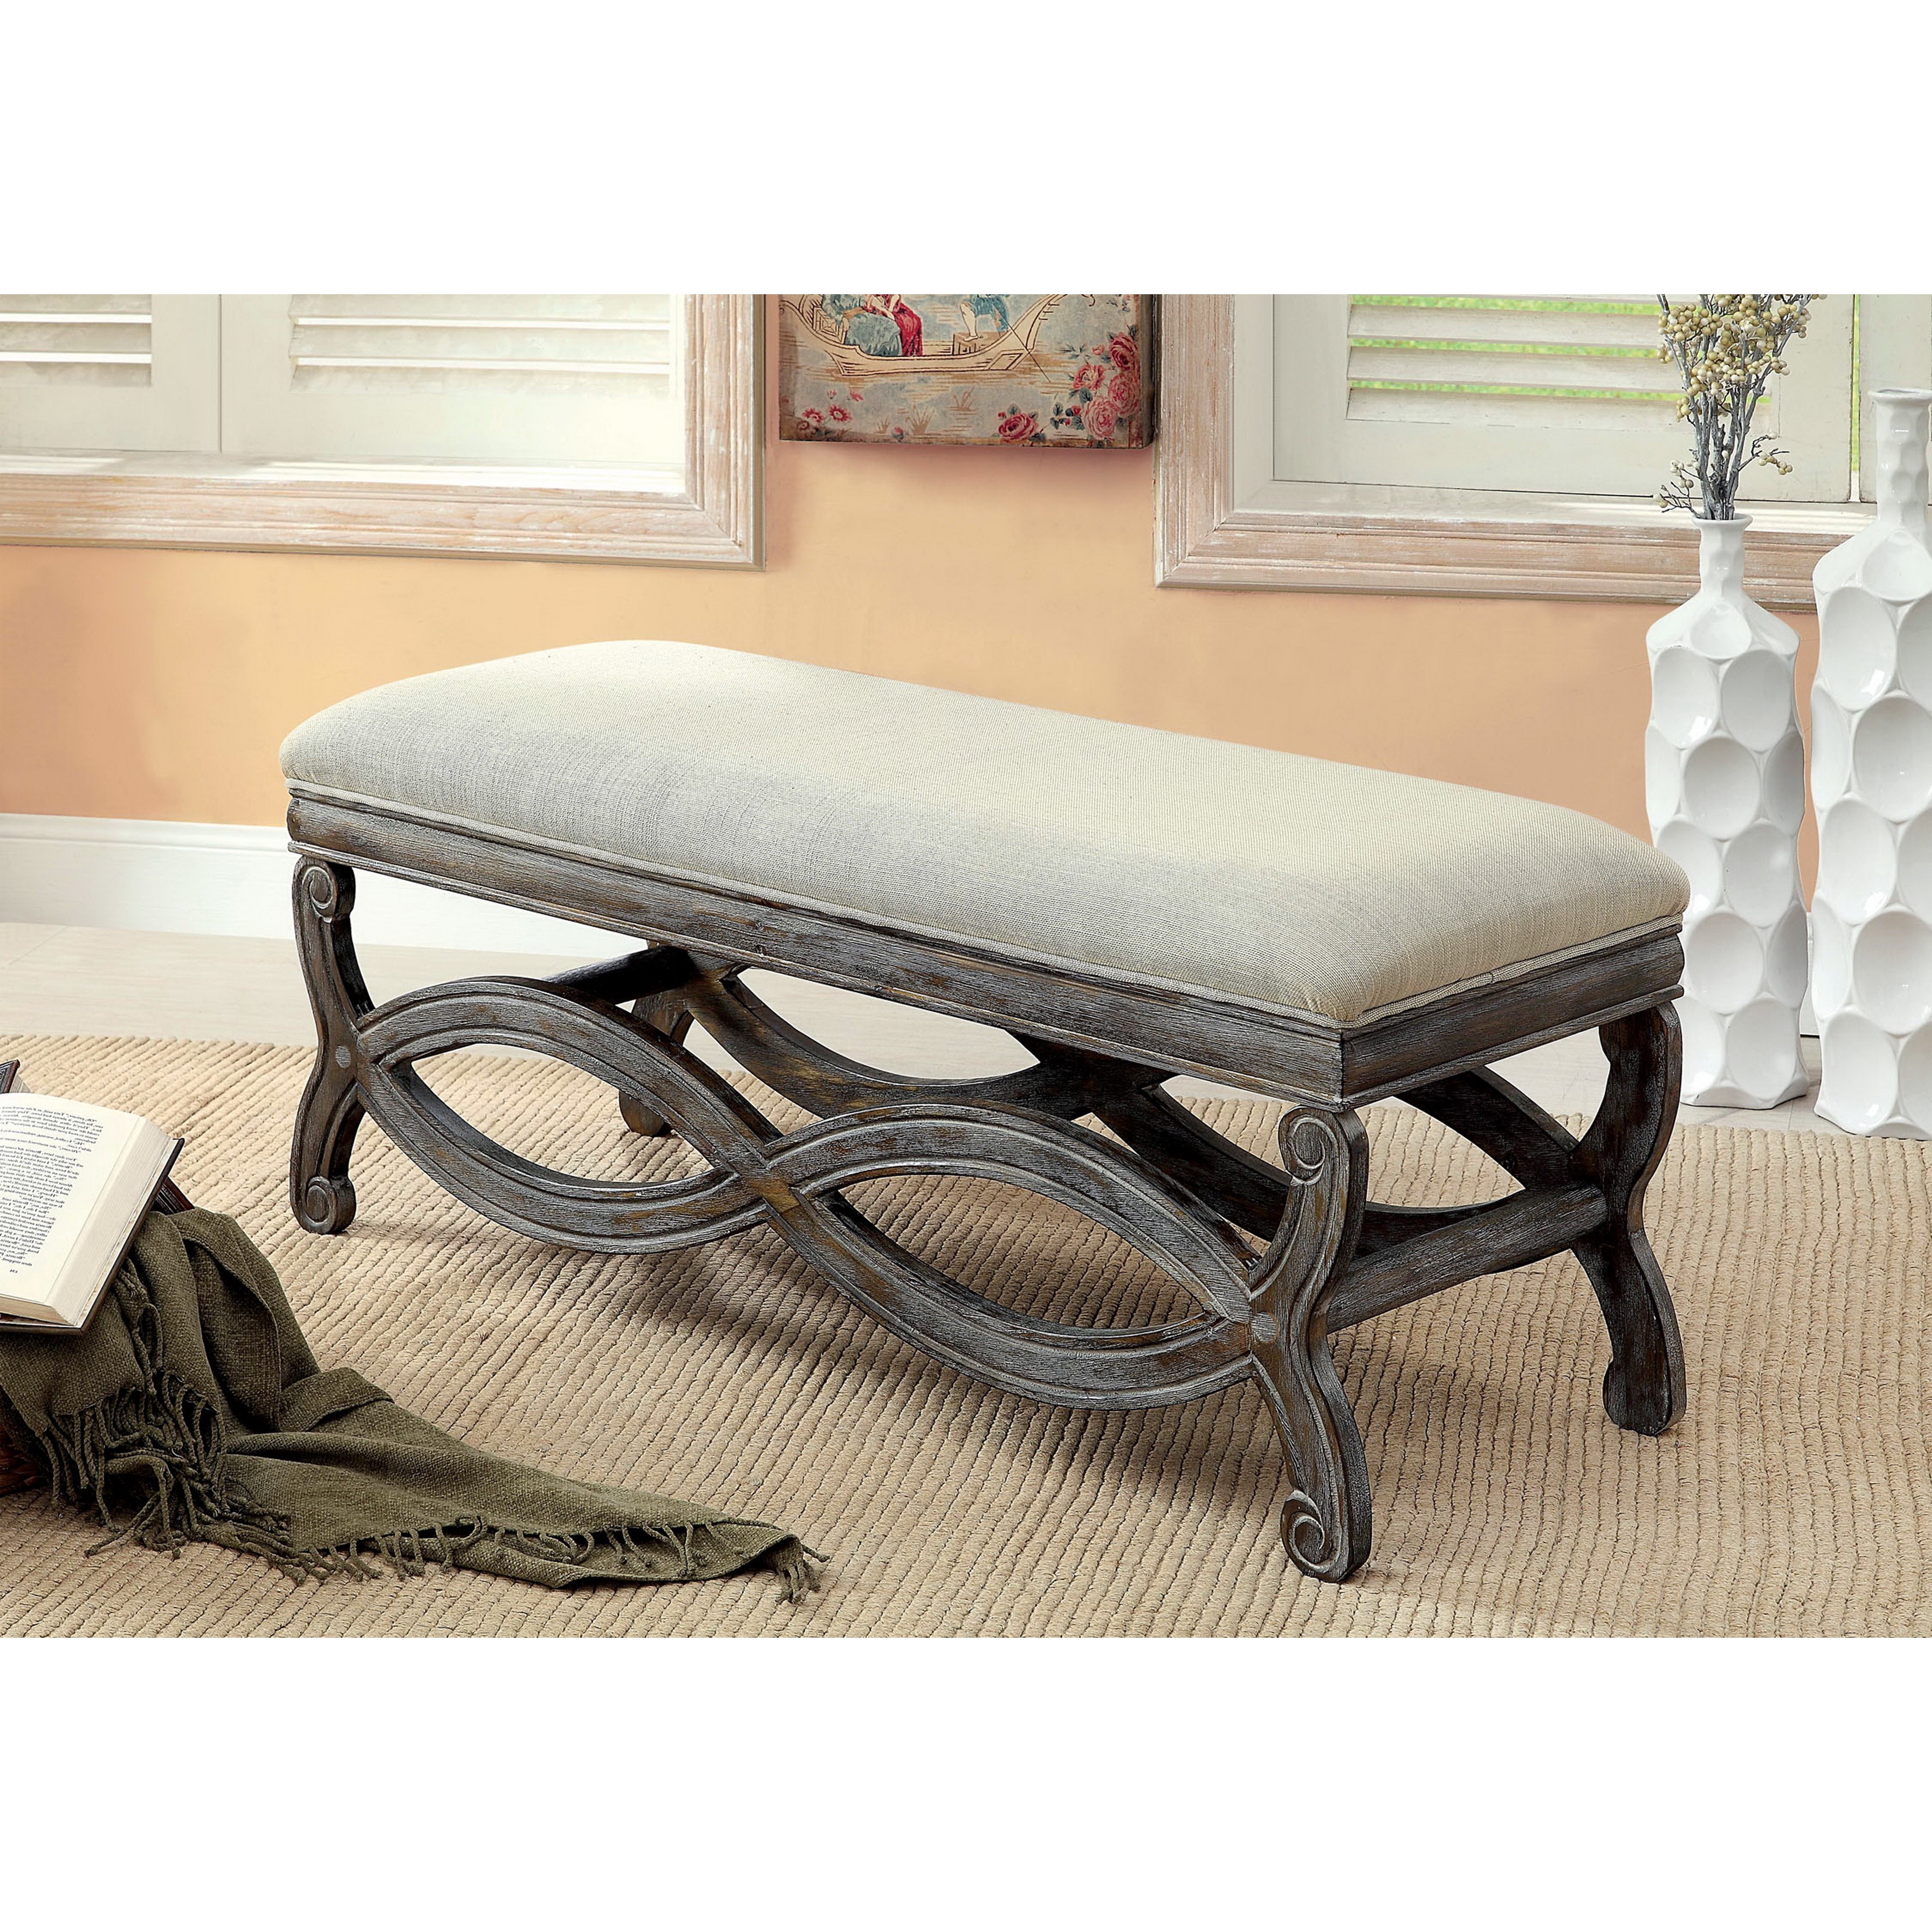 Furniture Of America Quazi Gray Solid Wood Reclaimed Bench